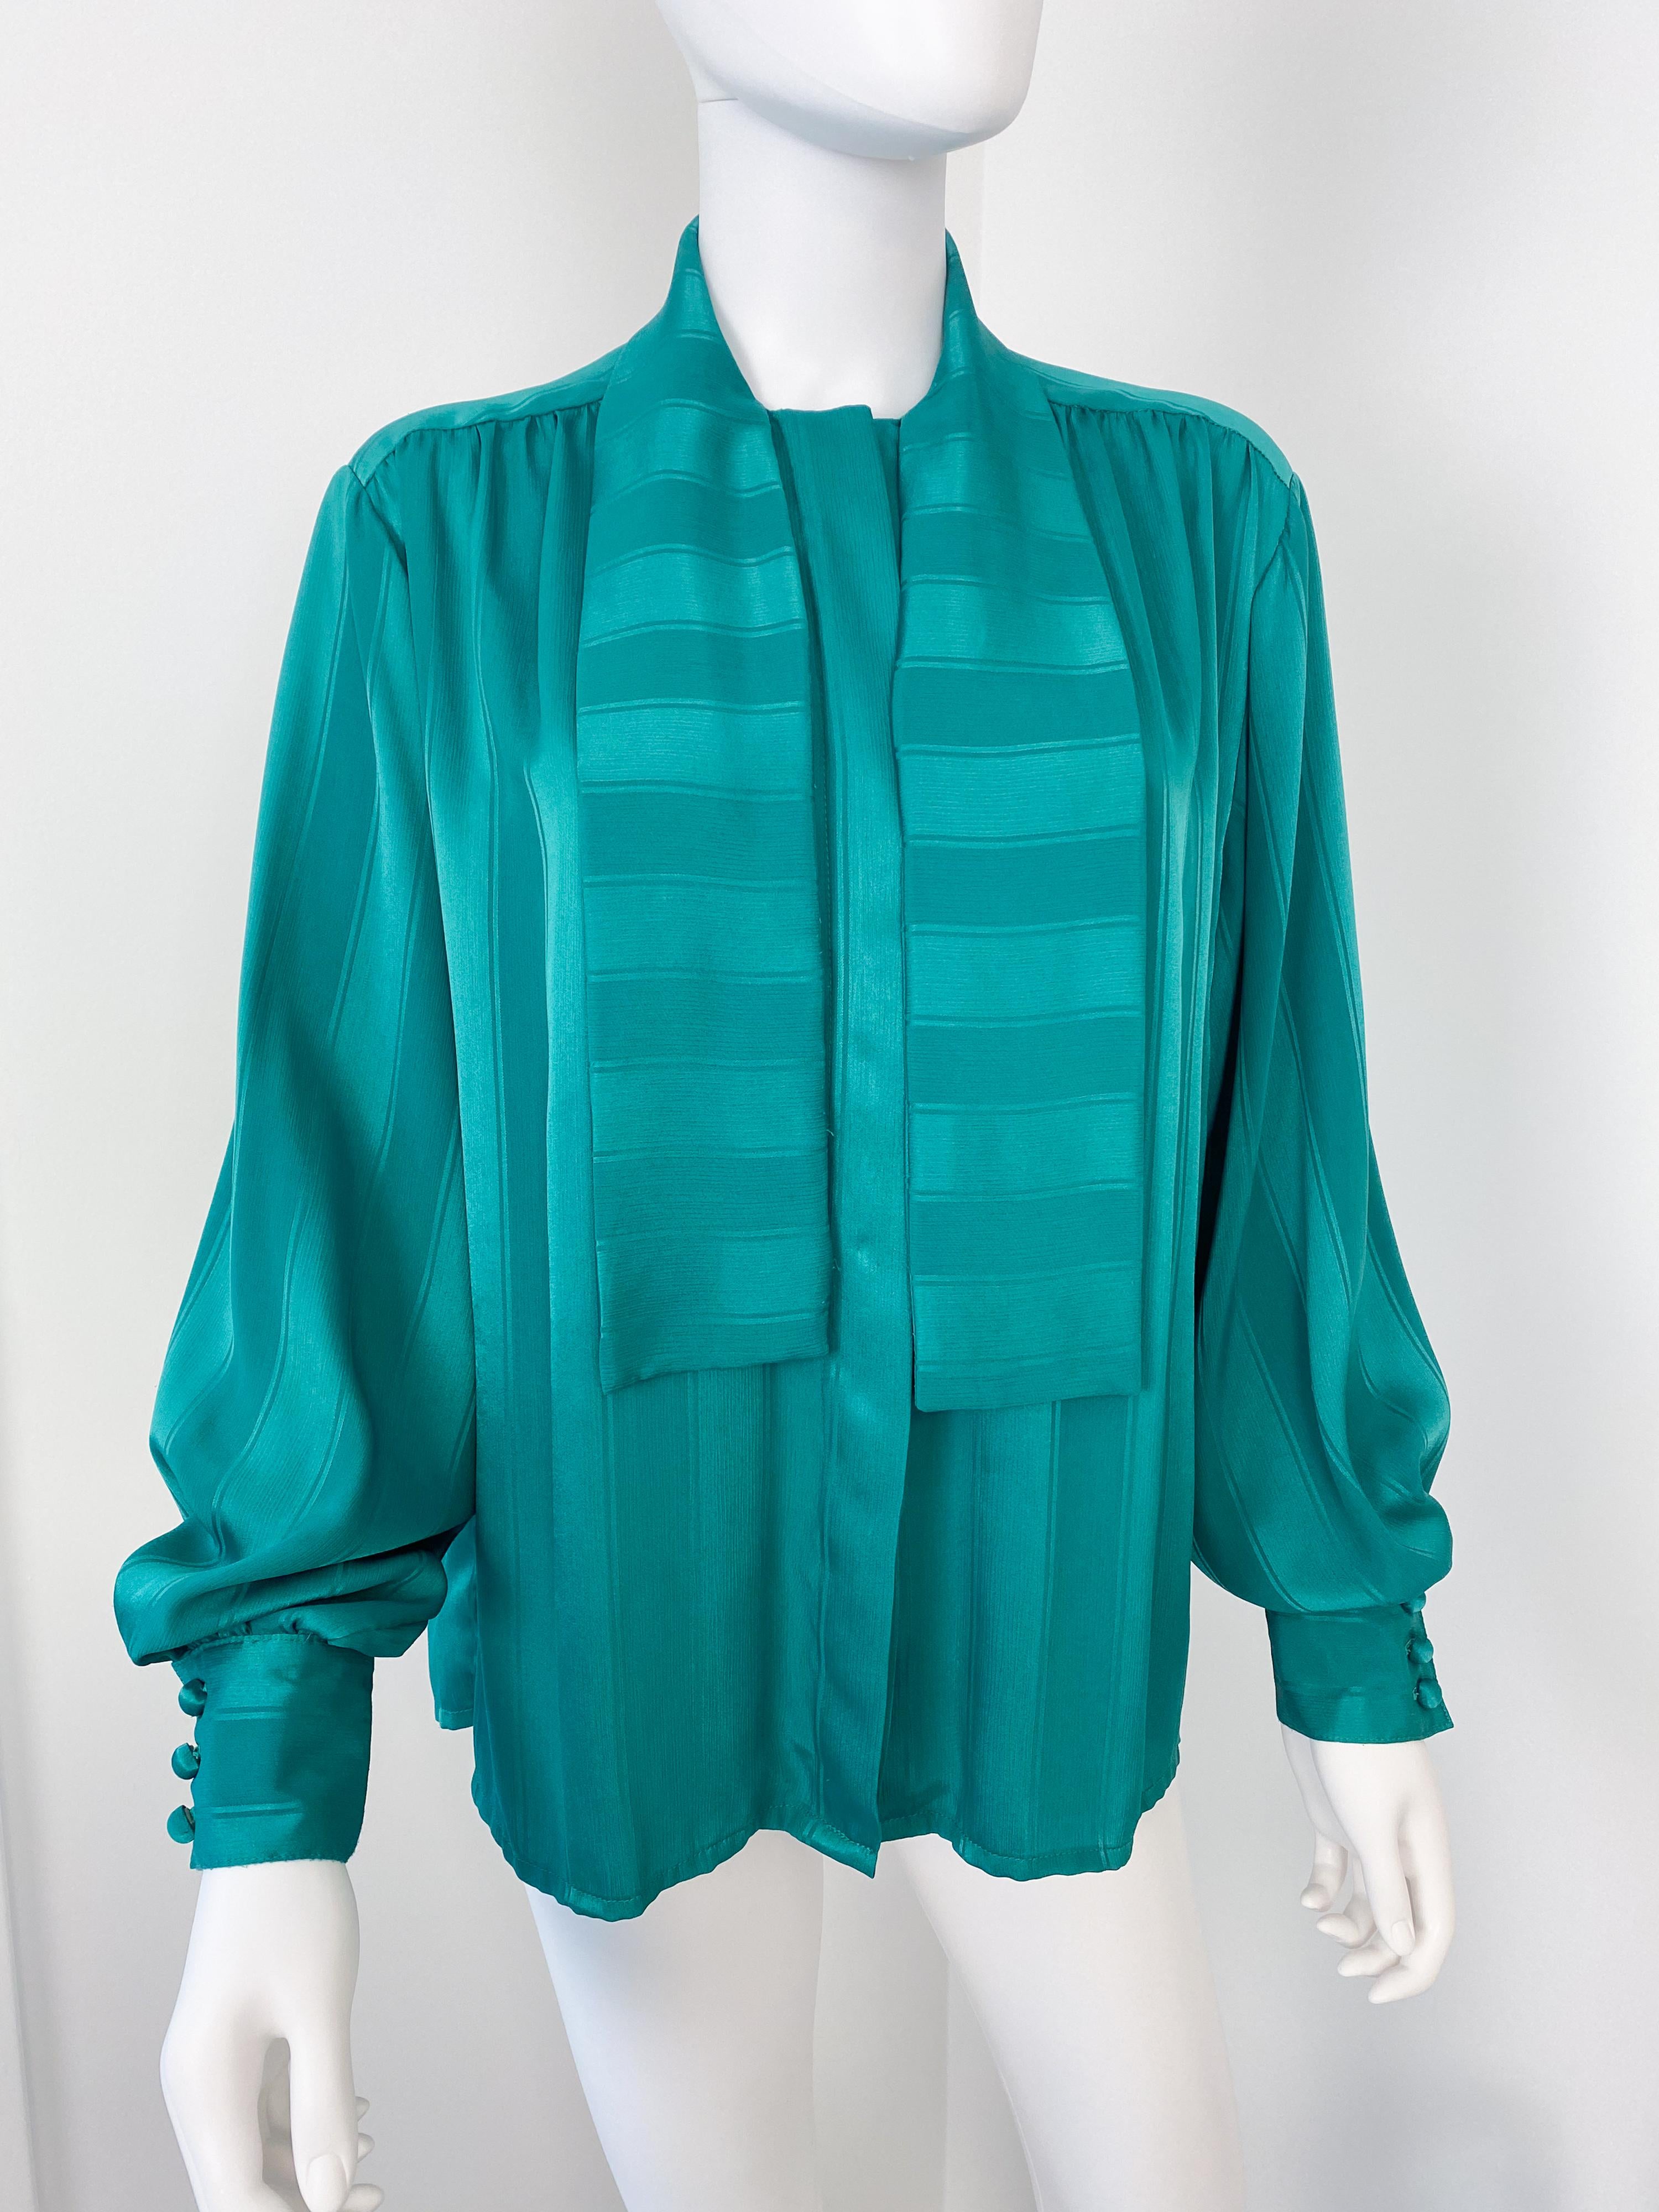 Vintage 1980s Silky Polyester Bow Blouse Top Emerald Green Stripes Size 12/14 In Excellent Condition For Sale In Atlanta, GA